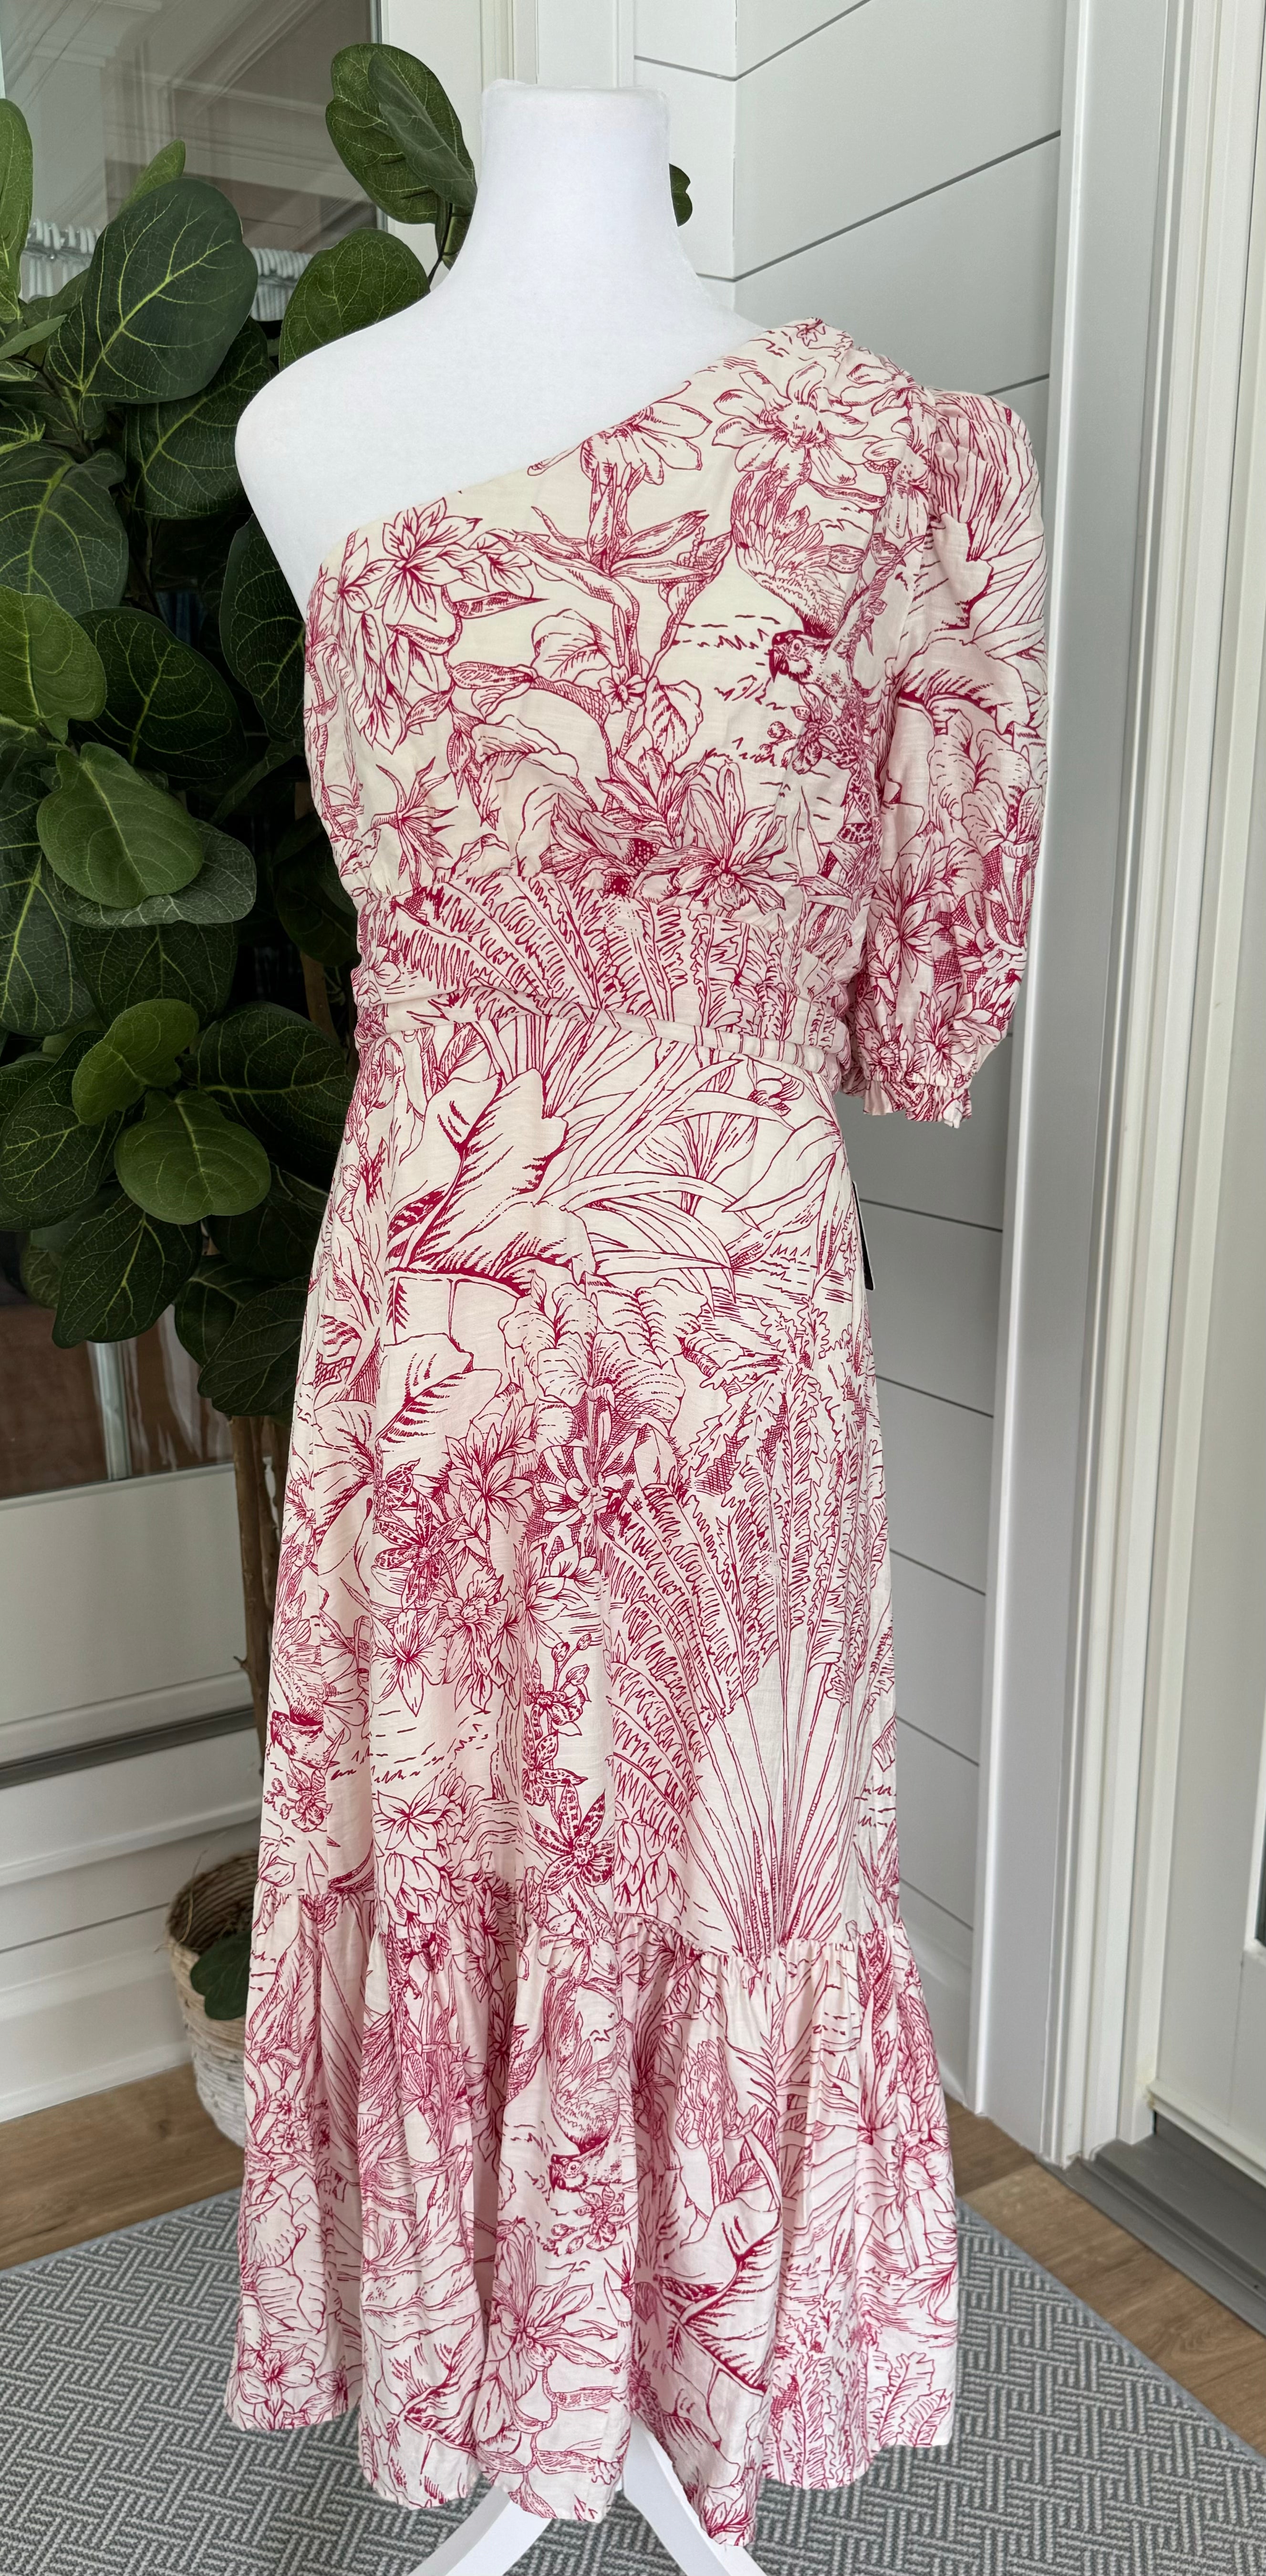 Express NWT One Shoulder Floral Dress, Pink/White Womens Size M